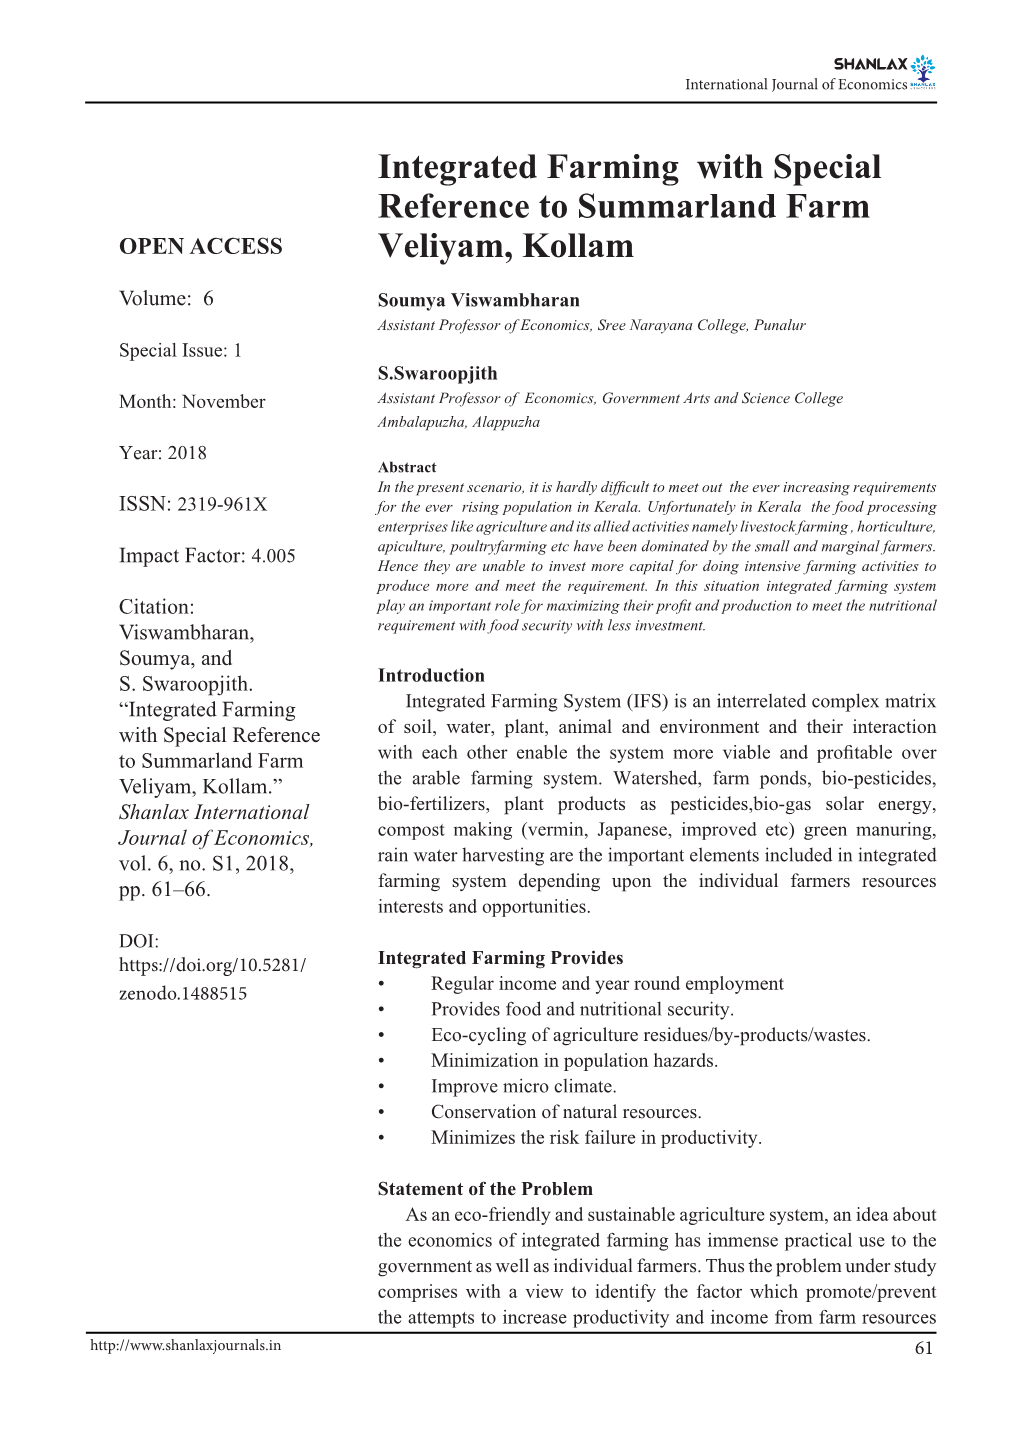 Integrated Farming with Special Reference to Summarland Farm OPEN ACCESS Veliyam, Kollam